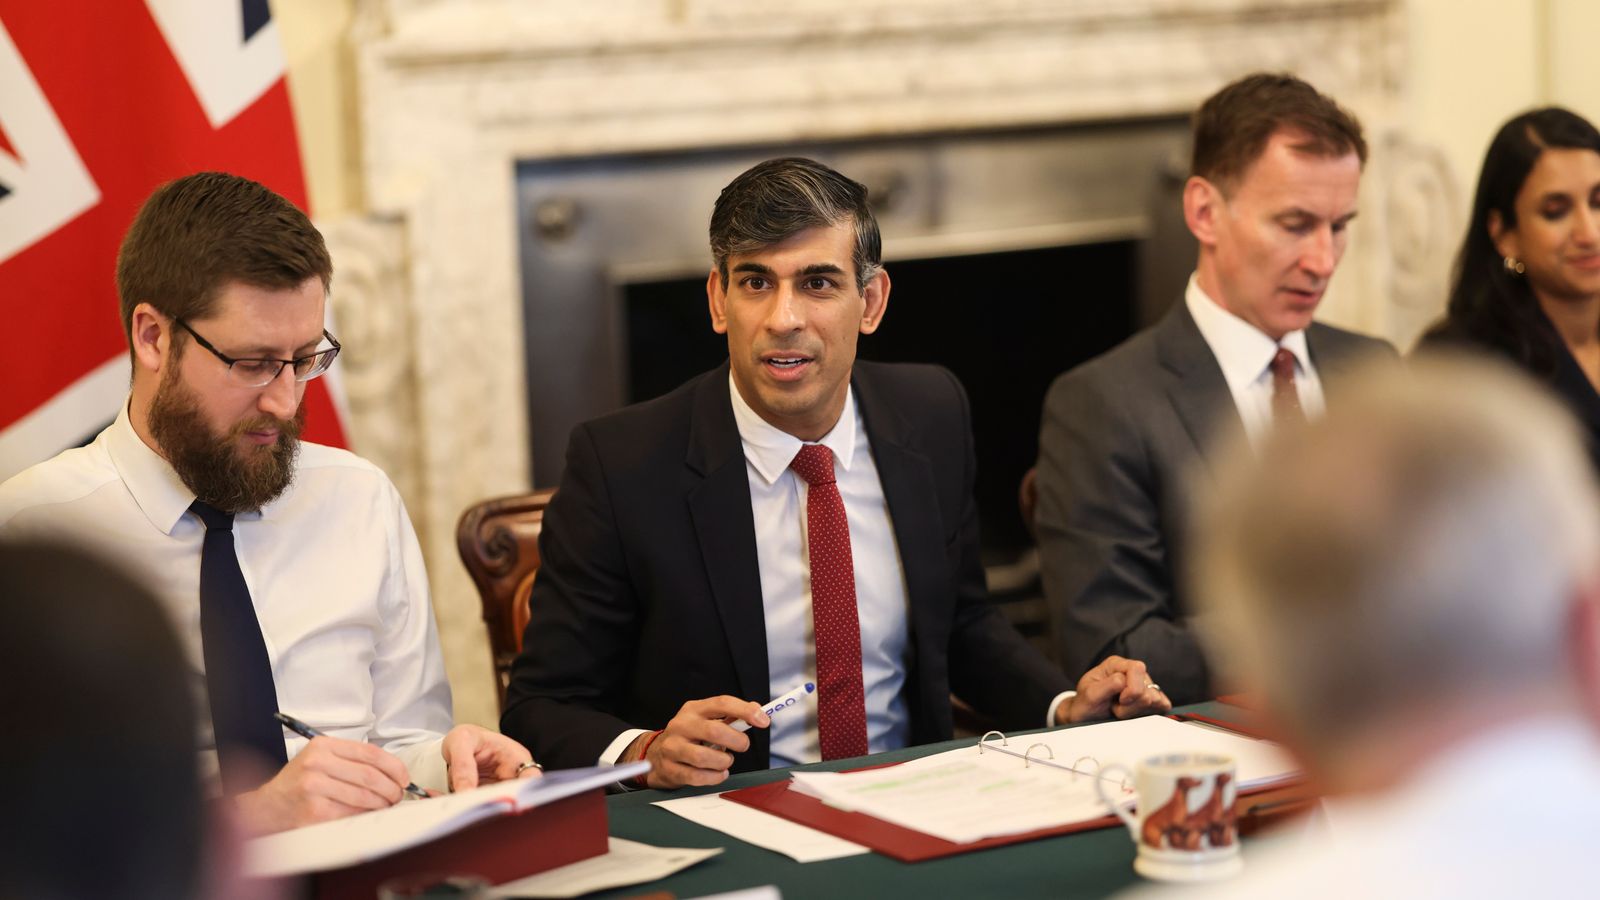 Rishi Sunak holds private meeting with chair of influential 1922 committee of backbench Tory MPs amid concerns over party's direction